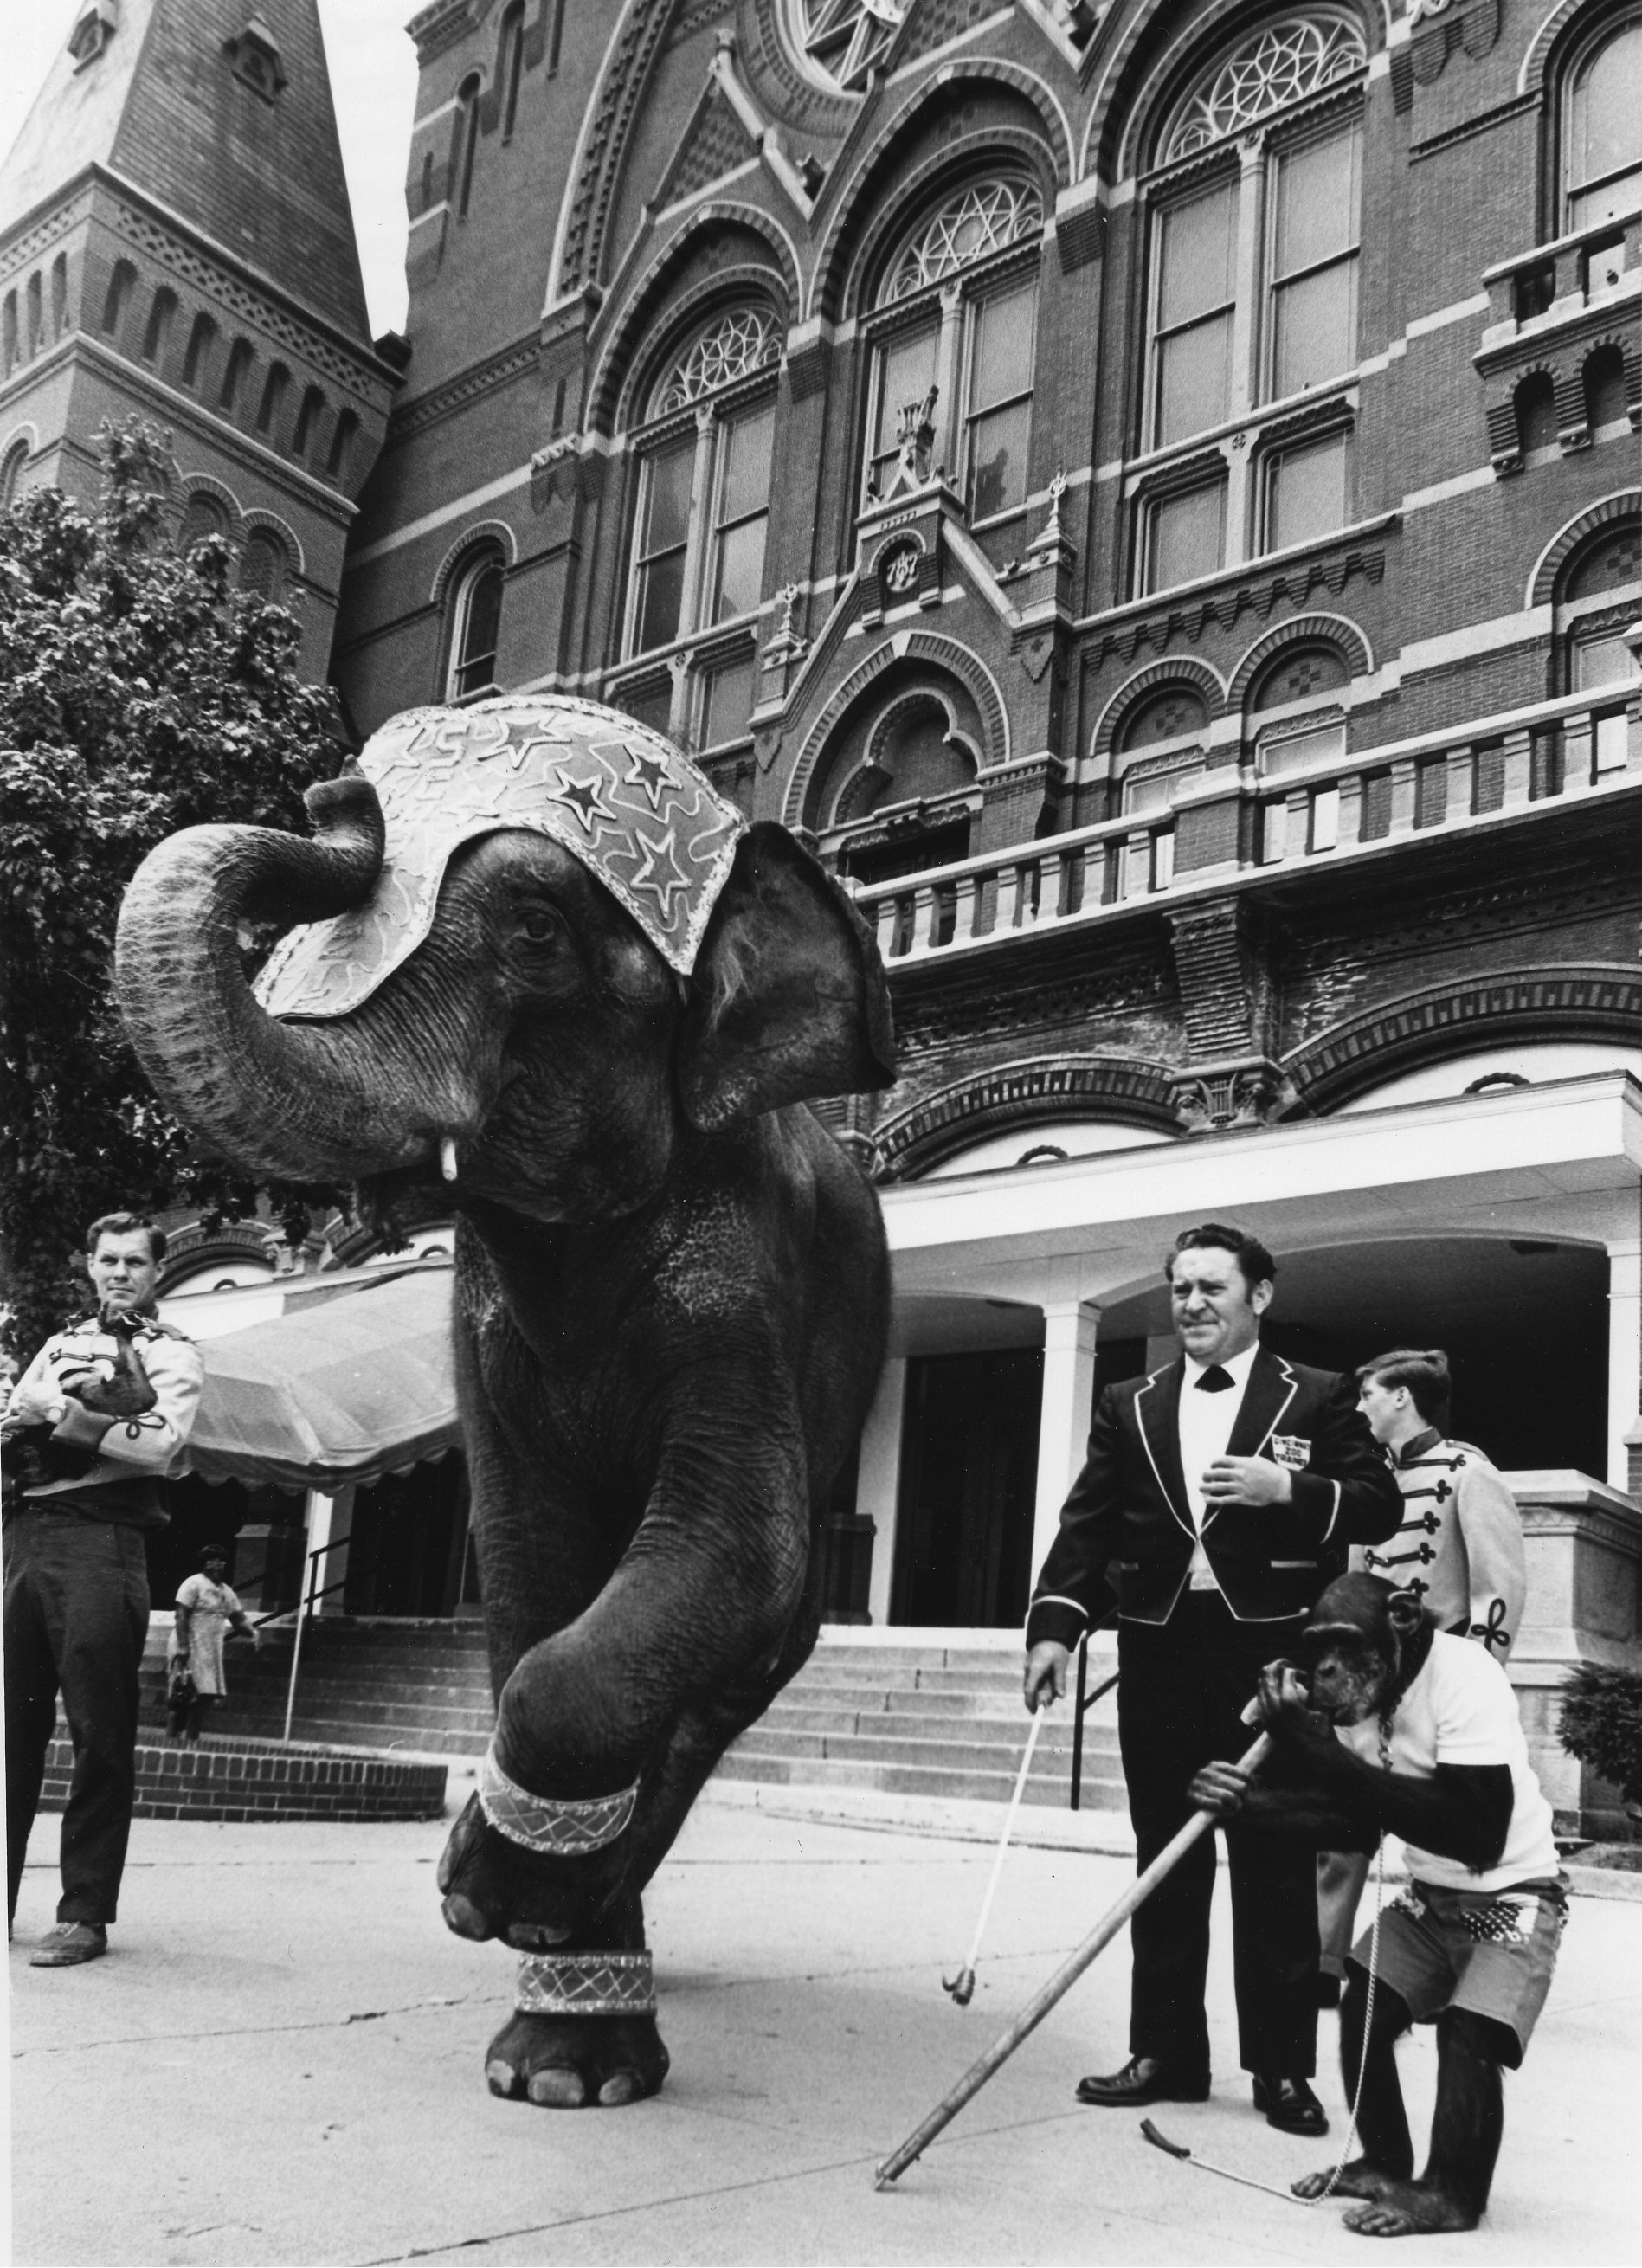  In 1972, the company moved its season to Cincinnati Music Hall. The spectacular opening production of  Mefistofele  was followed by the comic opera  Die Fledermaus . As a salute to Cincinnati Opera’s former home, the Cincinnati Zoo,  Die Fledermaus 